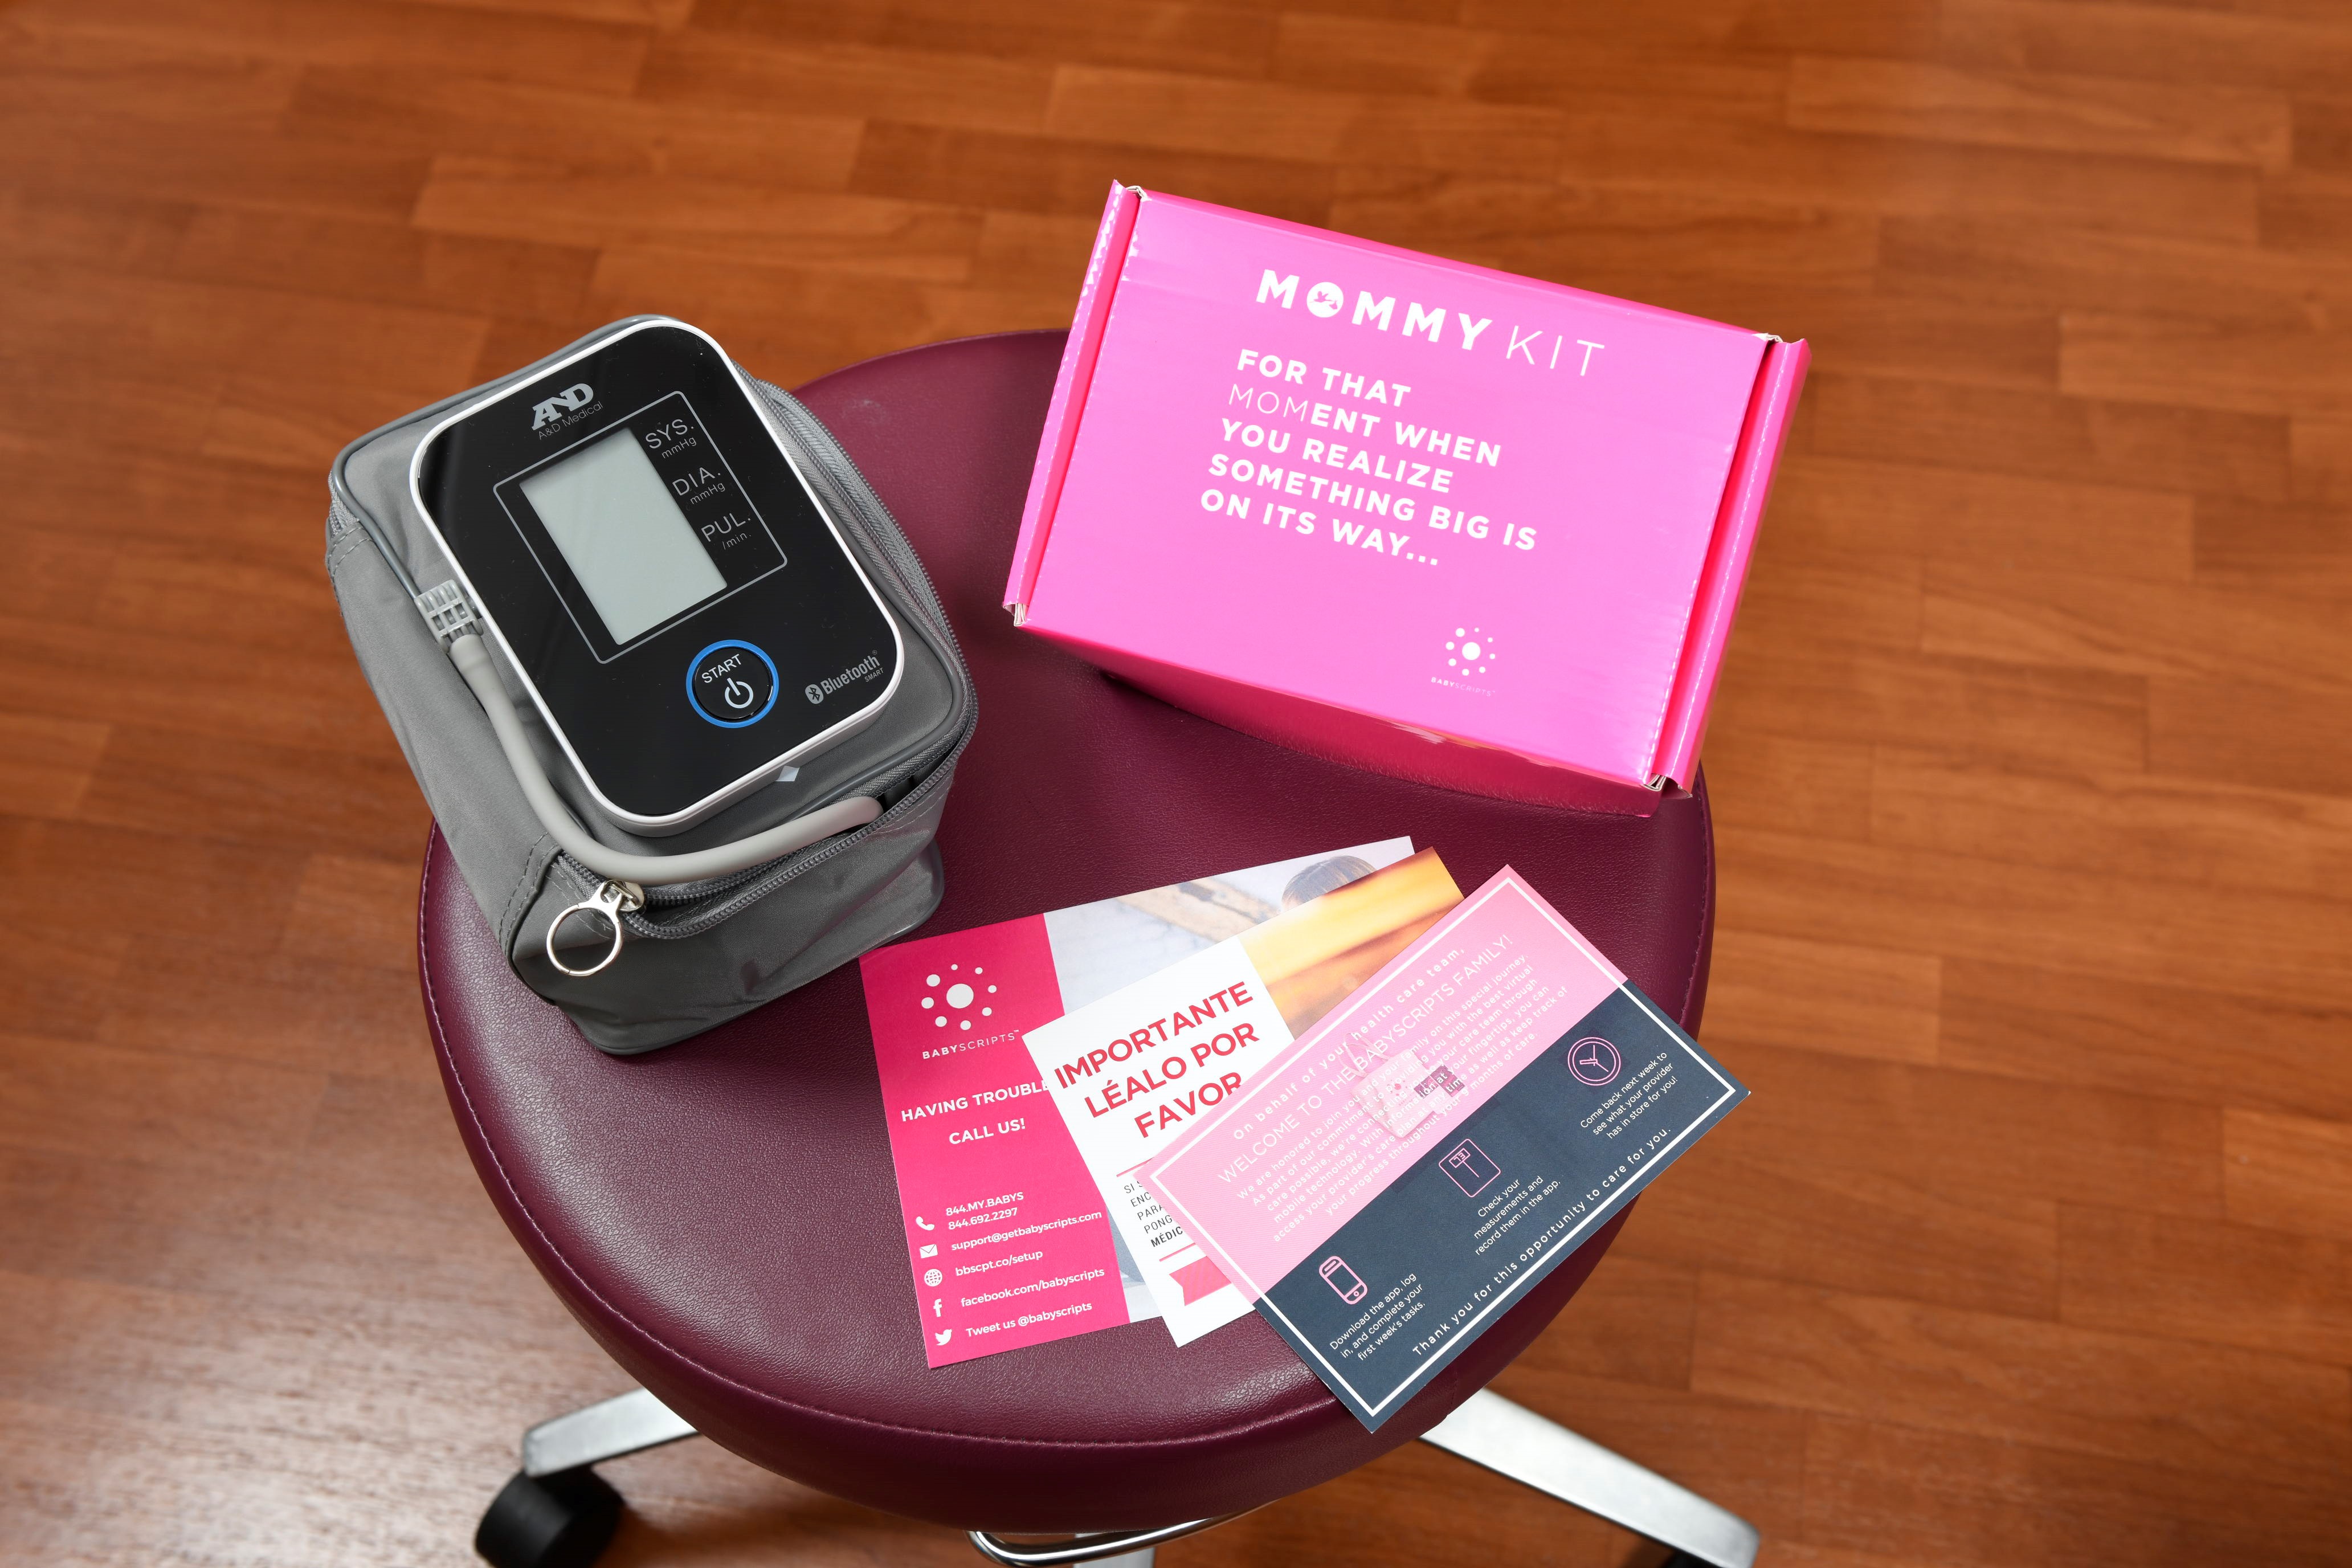 Babyscripts’ Mommy Kits include internet-connected blood pressure cuffs and scales.